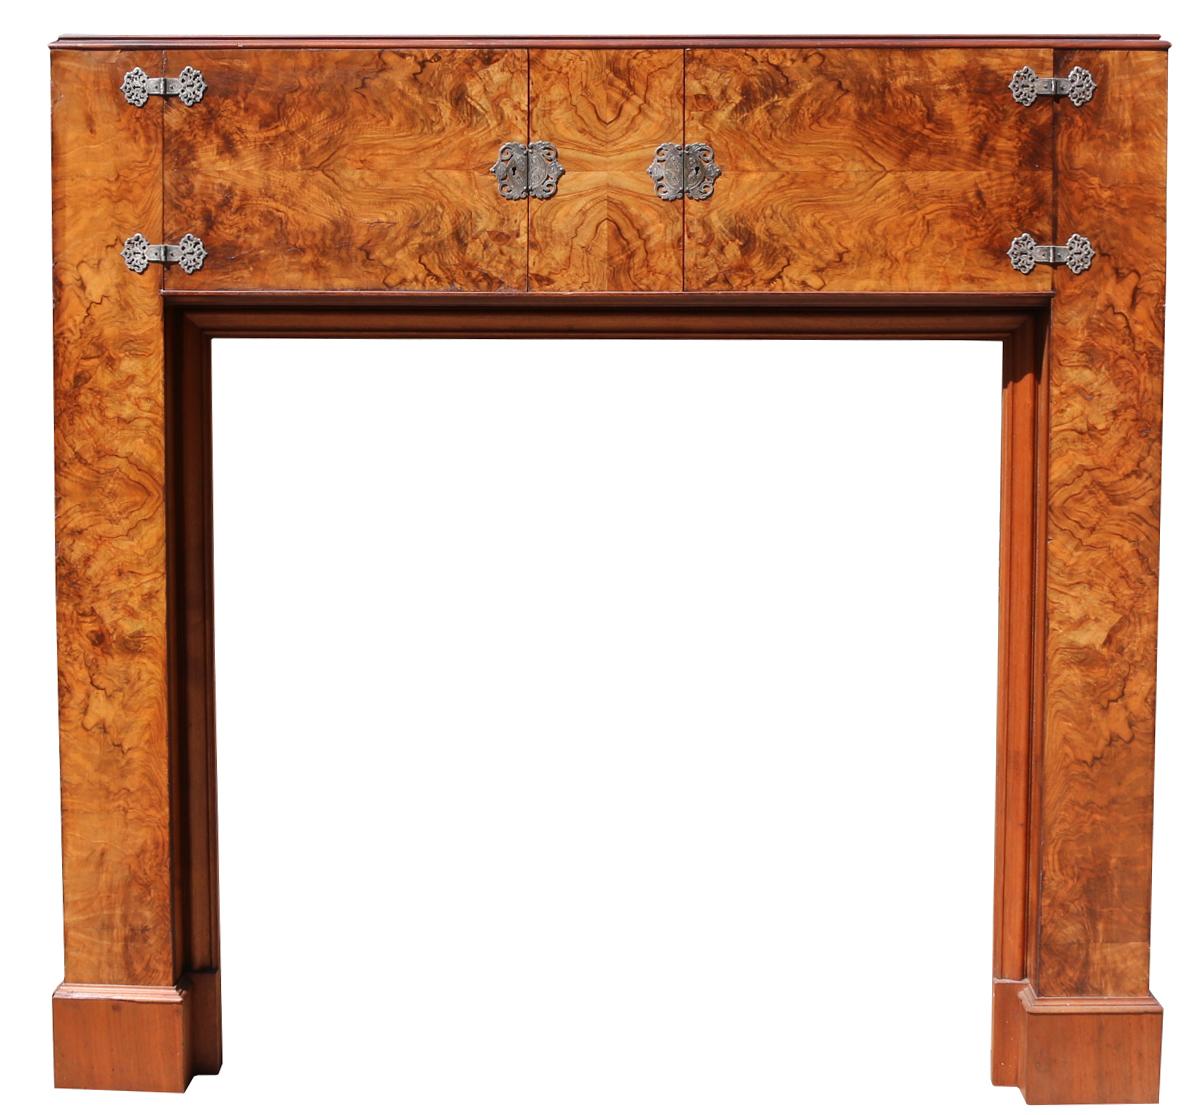 An unusual model, only the second we have seen and bought in the last decade. Fitted with two cupboards to the frieze. Each cupboard backed with mirror glass. Originally fitted with glass shelves. We do not have keys for the locks.

This fire